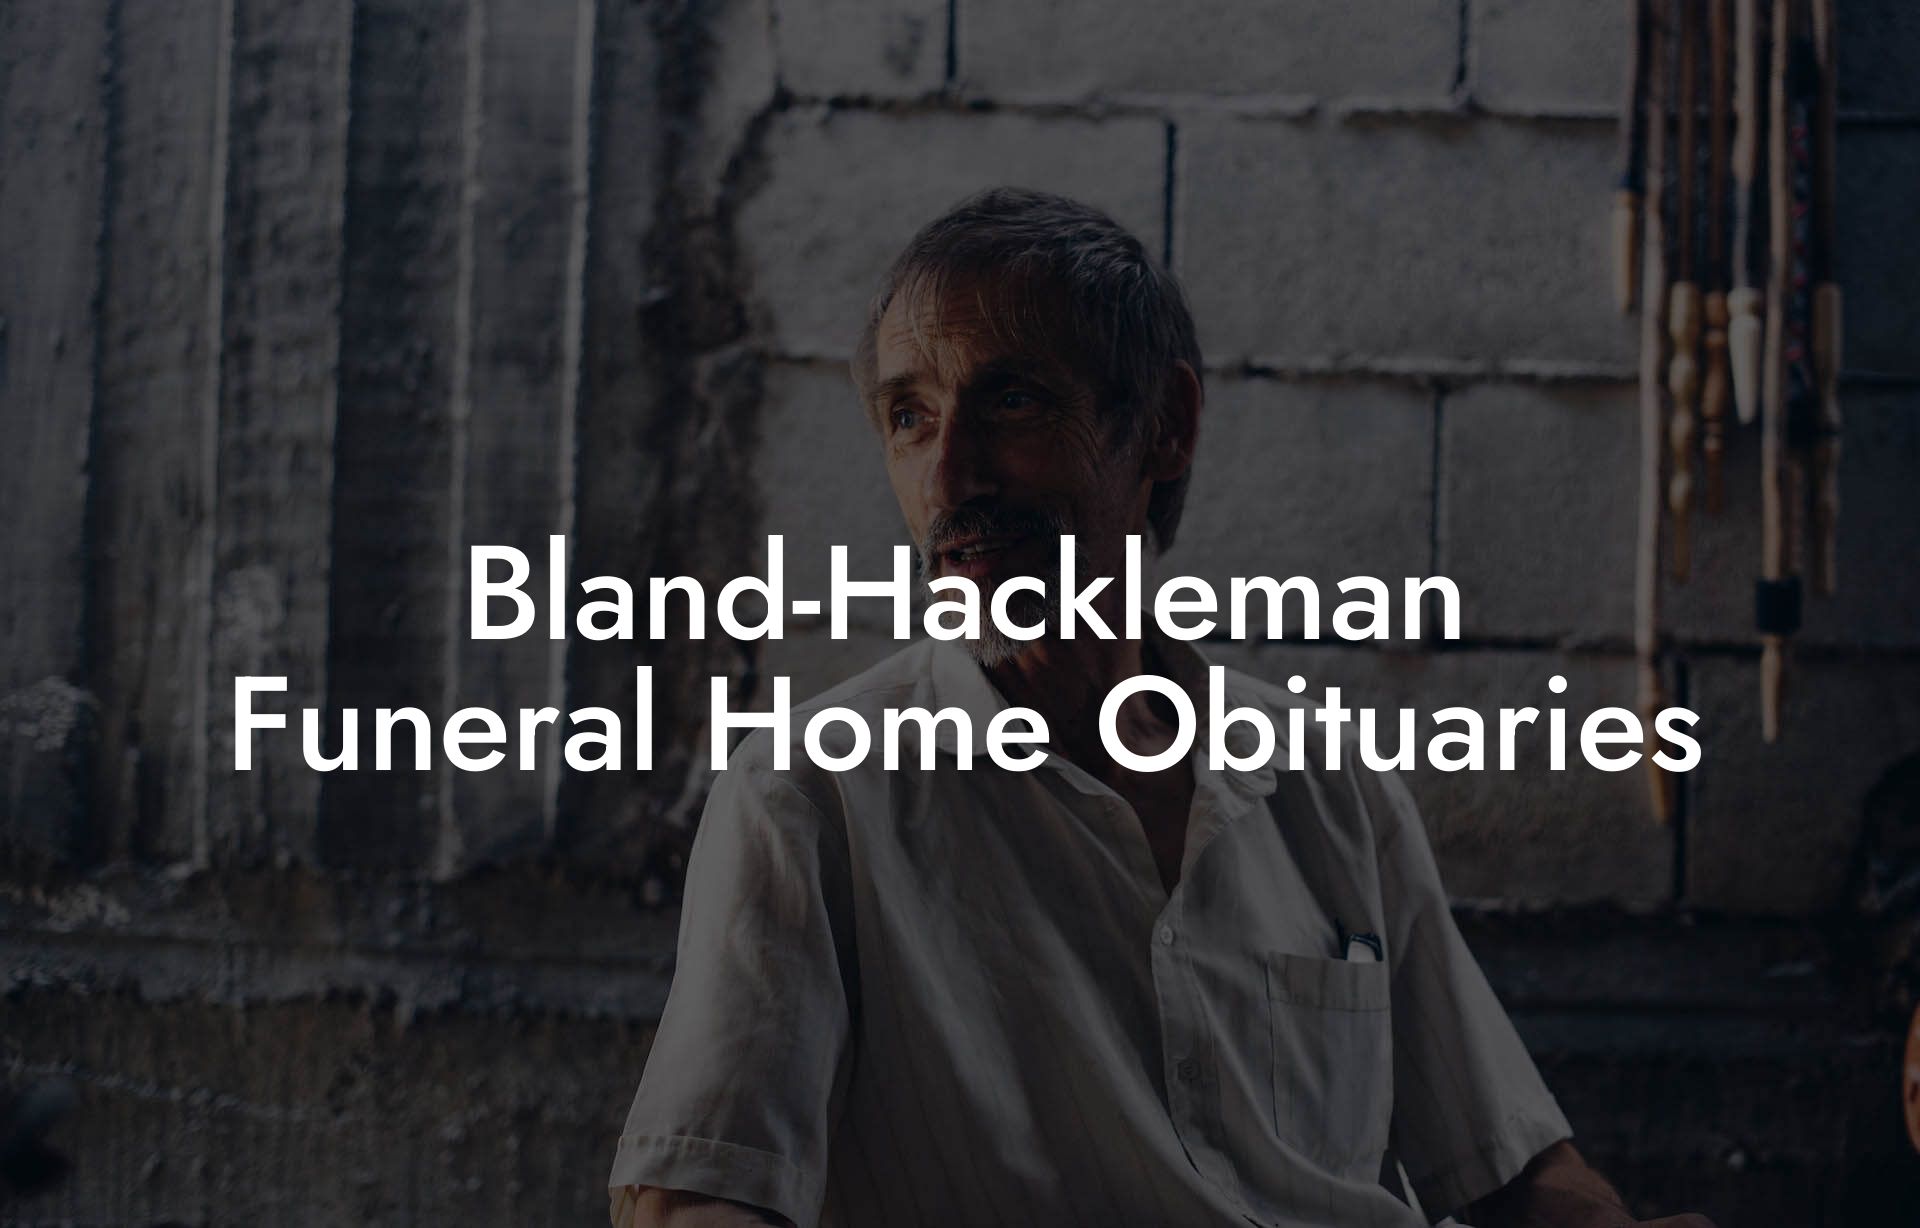 Bland-Hackleman Funeral Home Obituaries